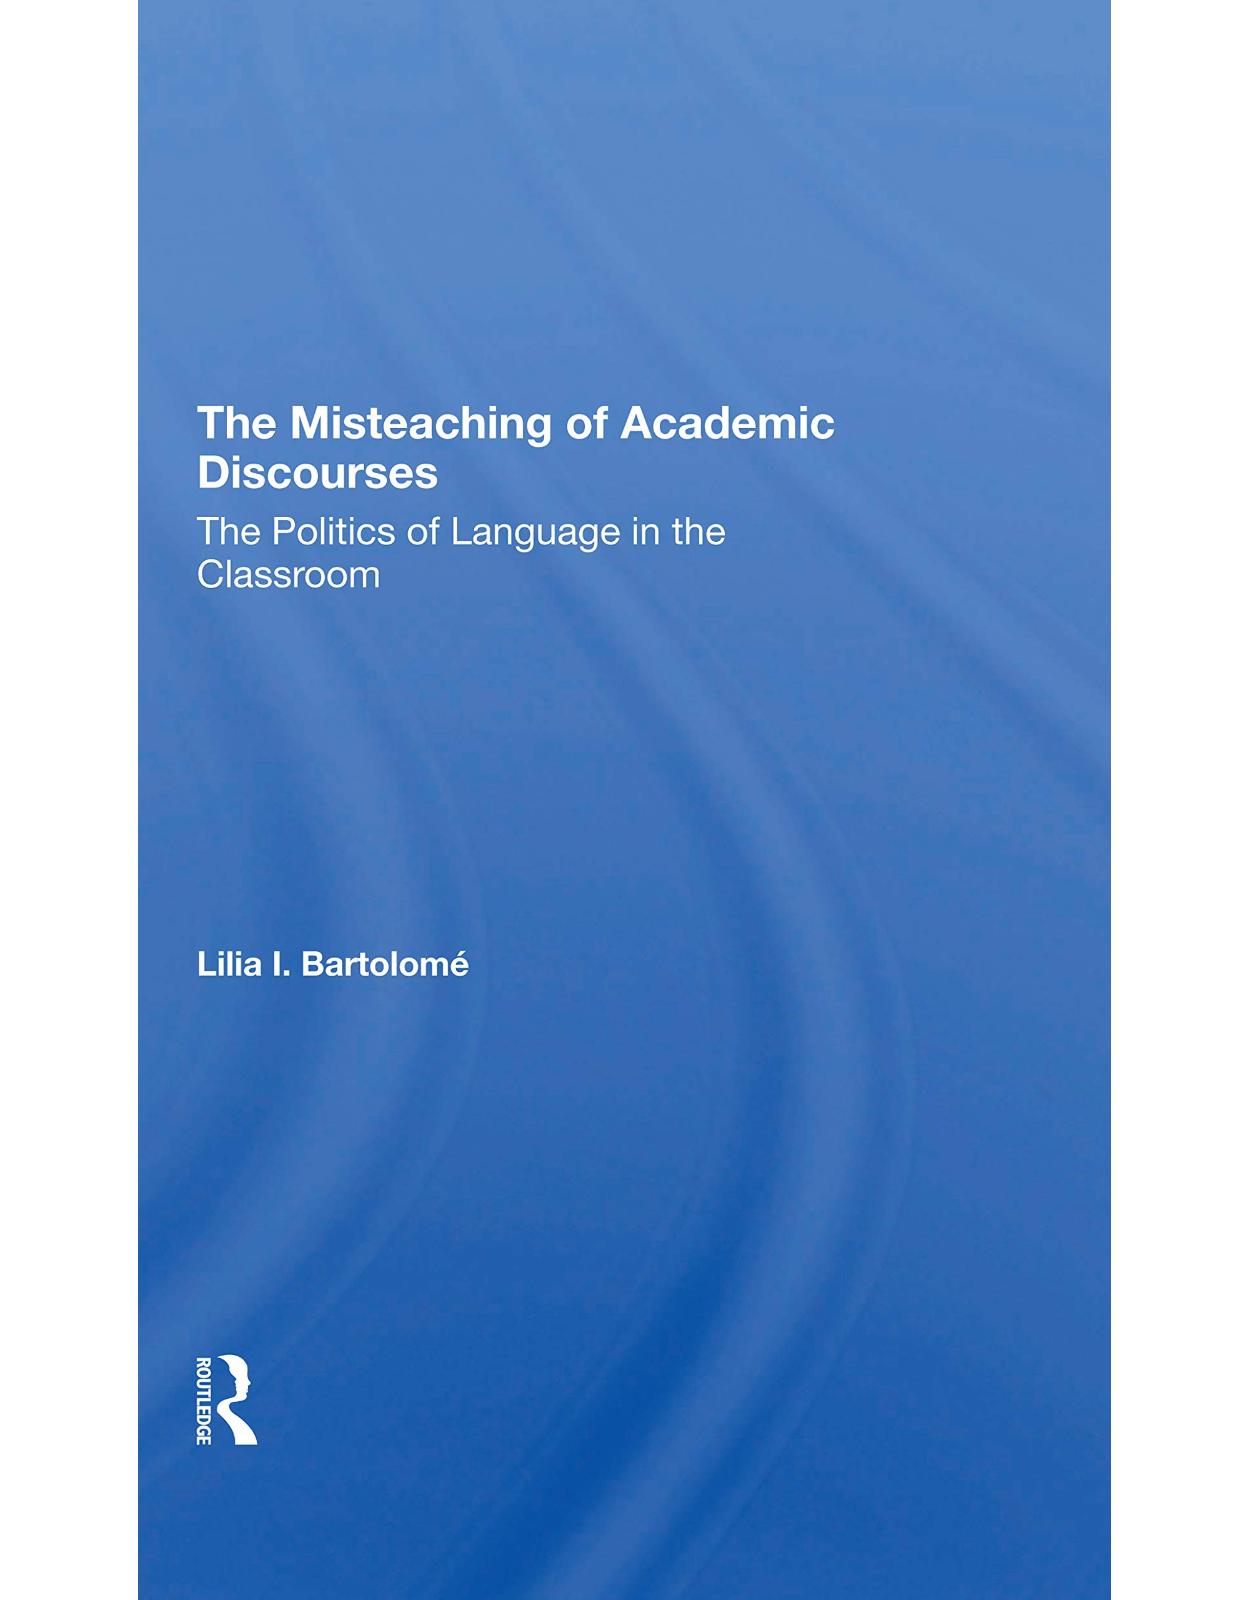 The Misteaching Of Academic Discourses: The Politics Of Language In The Classroom